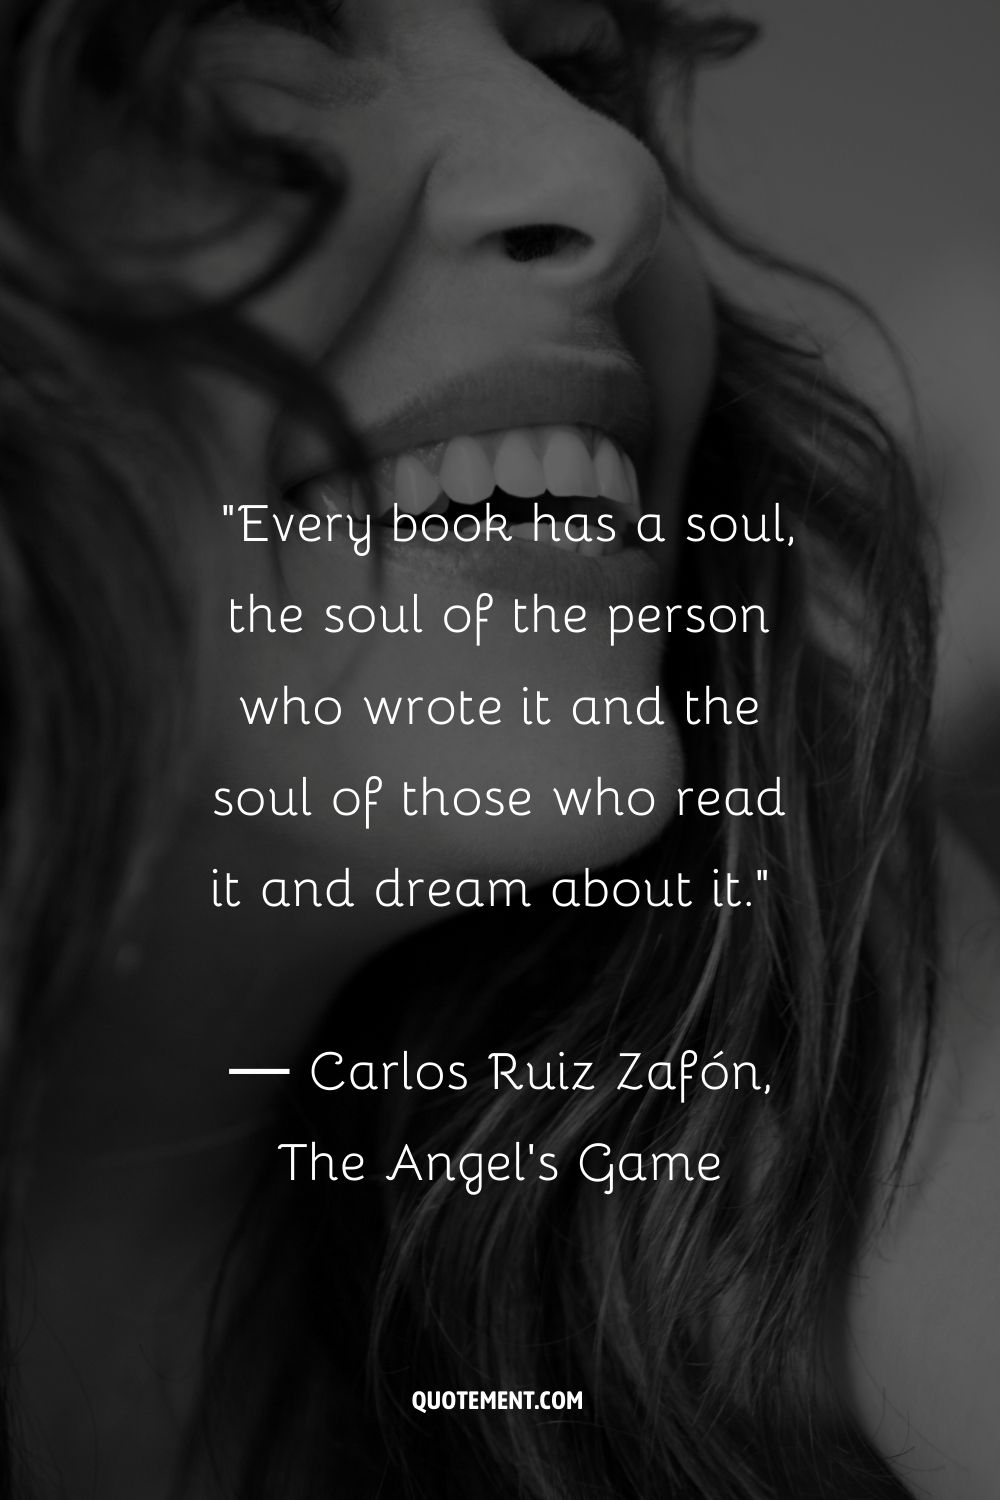 Every book has a soul, the soul of the person who wrote it and the soul of those who read it and dream about it